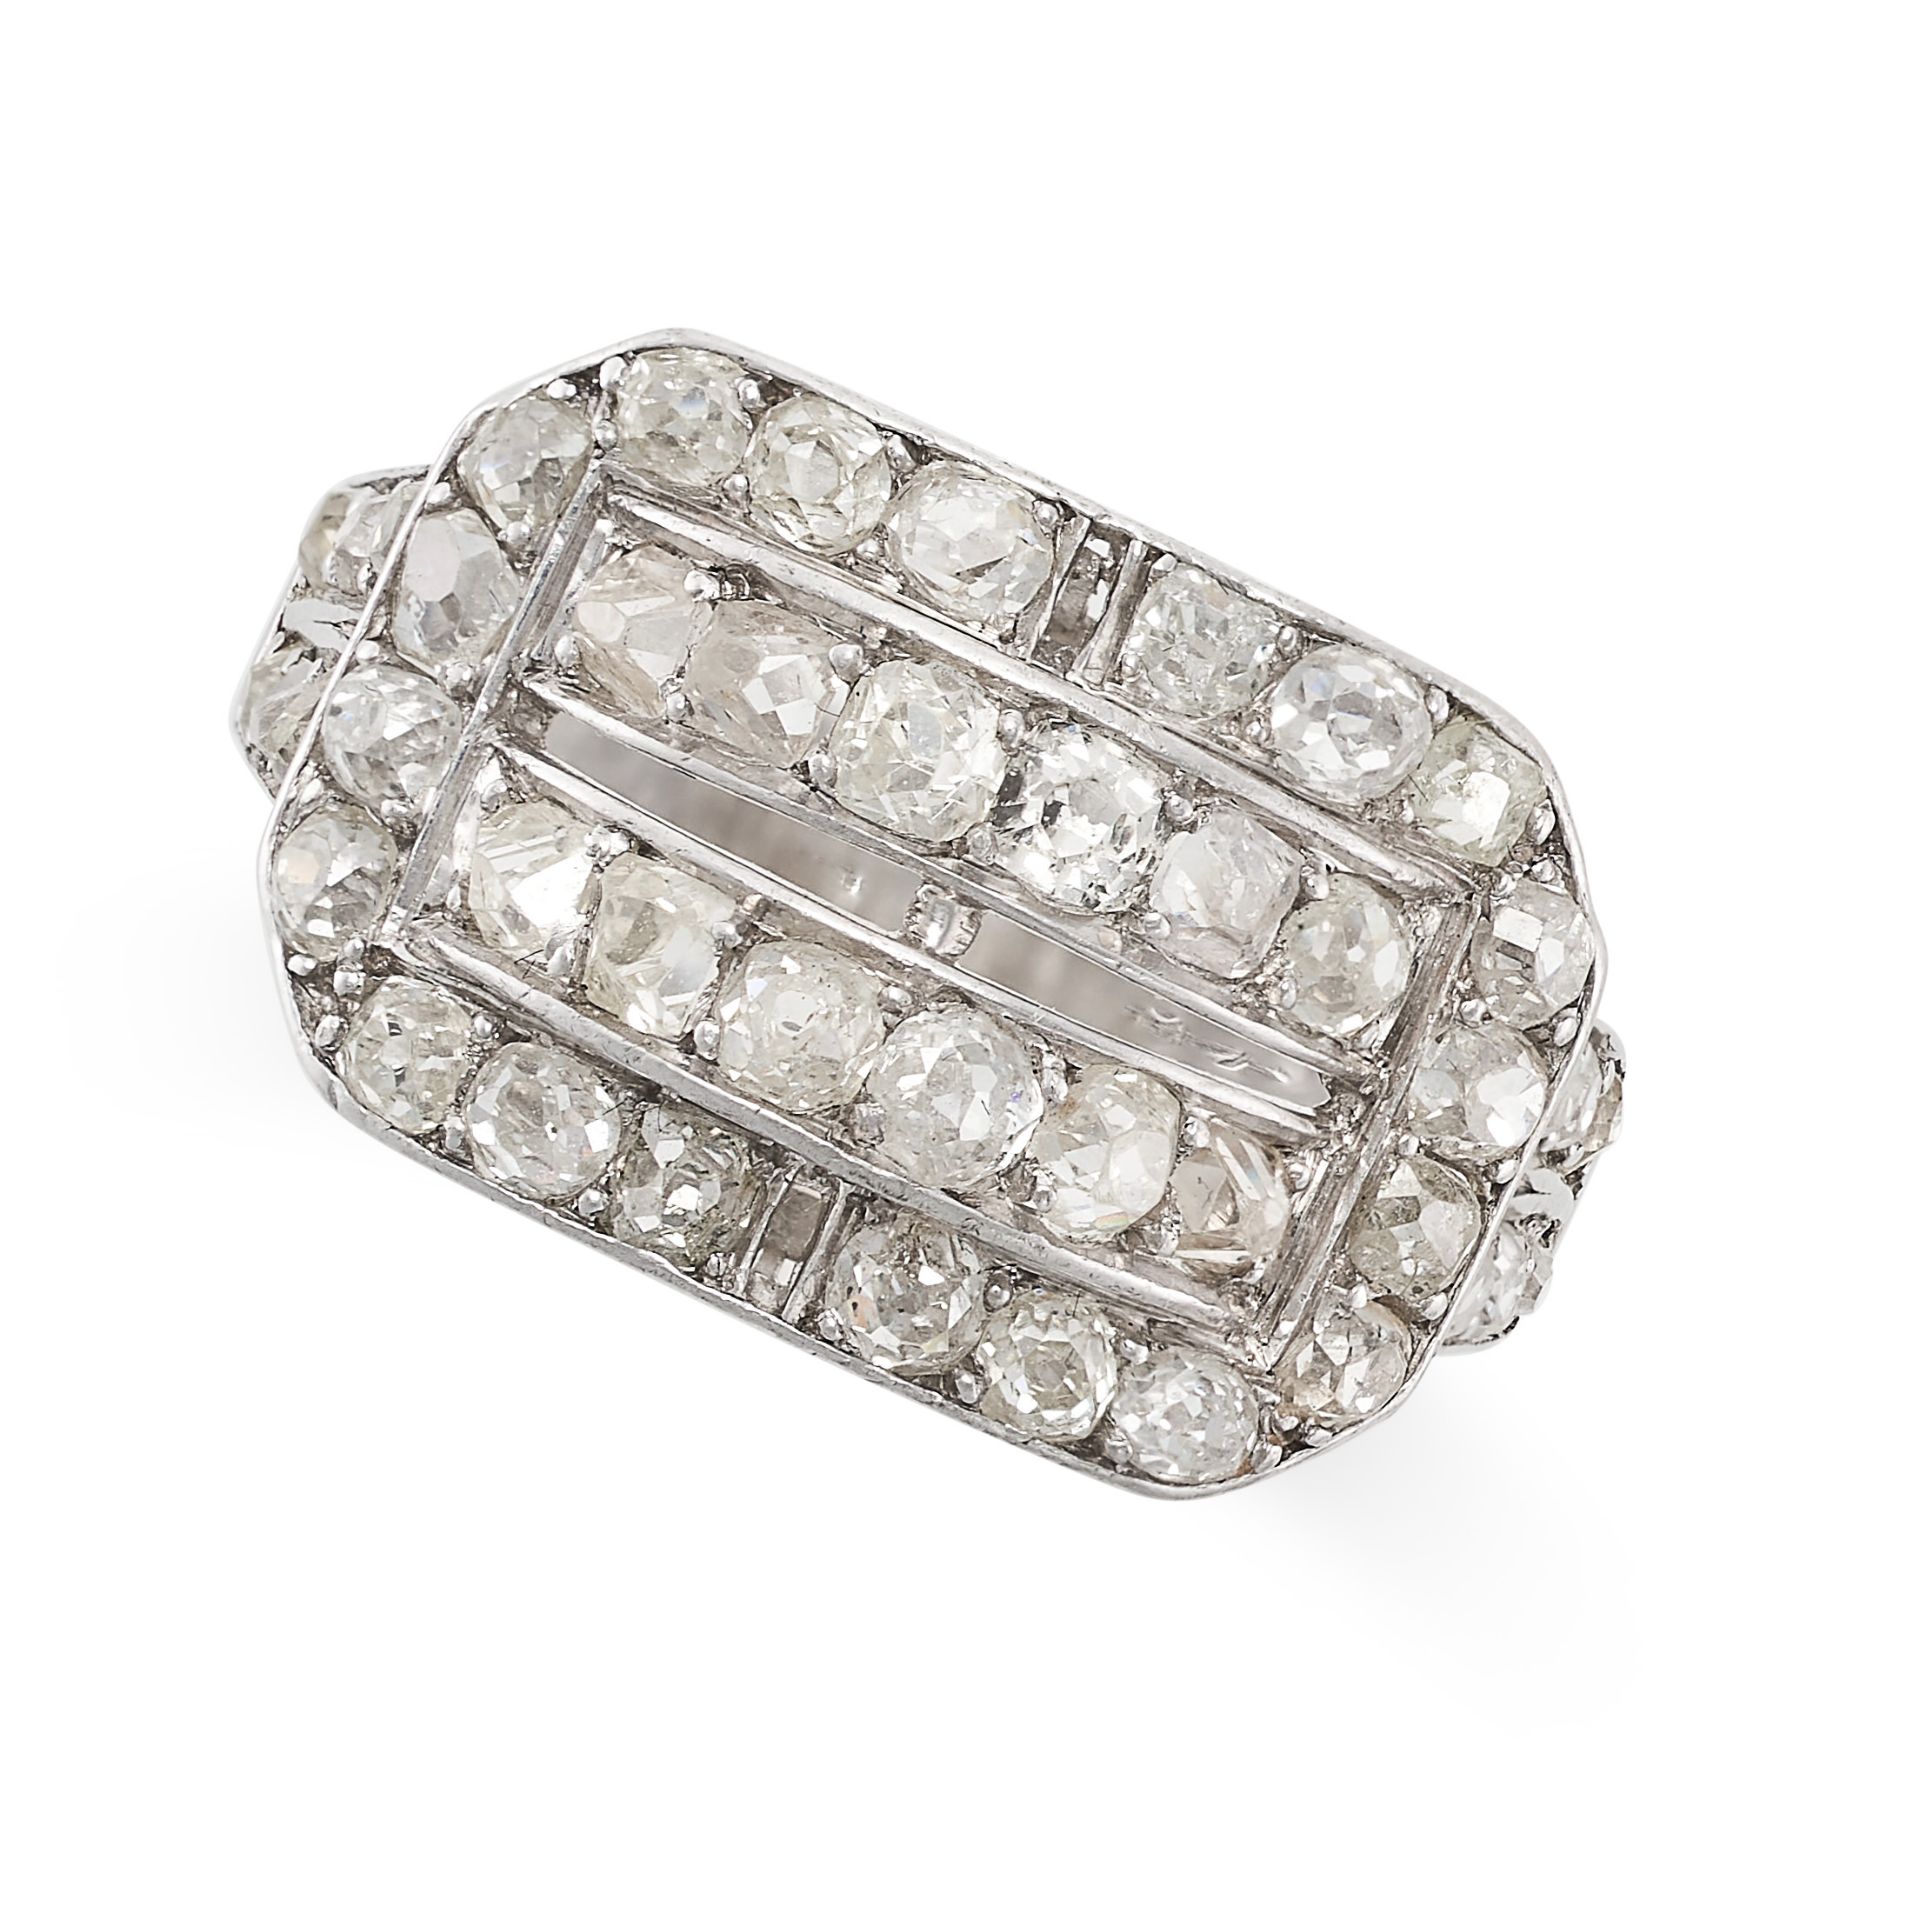 NO RESERVE - AN ART DECO DIAMOND DRESS RING in platinum, the geometric face set with rows of old ...